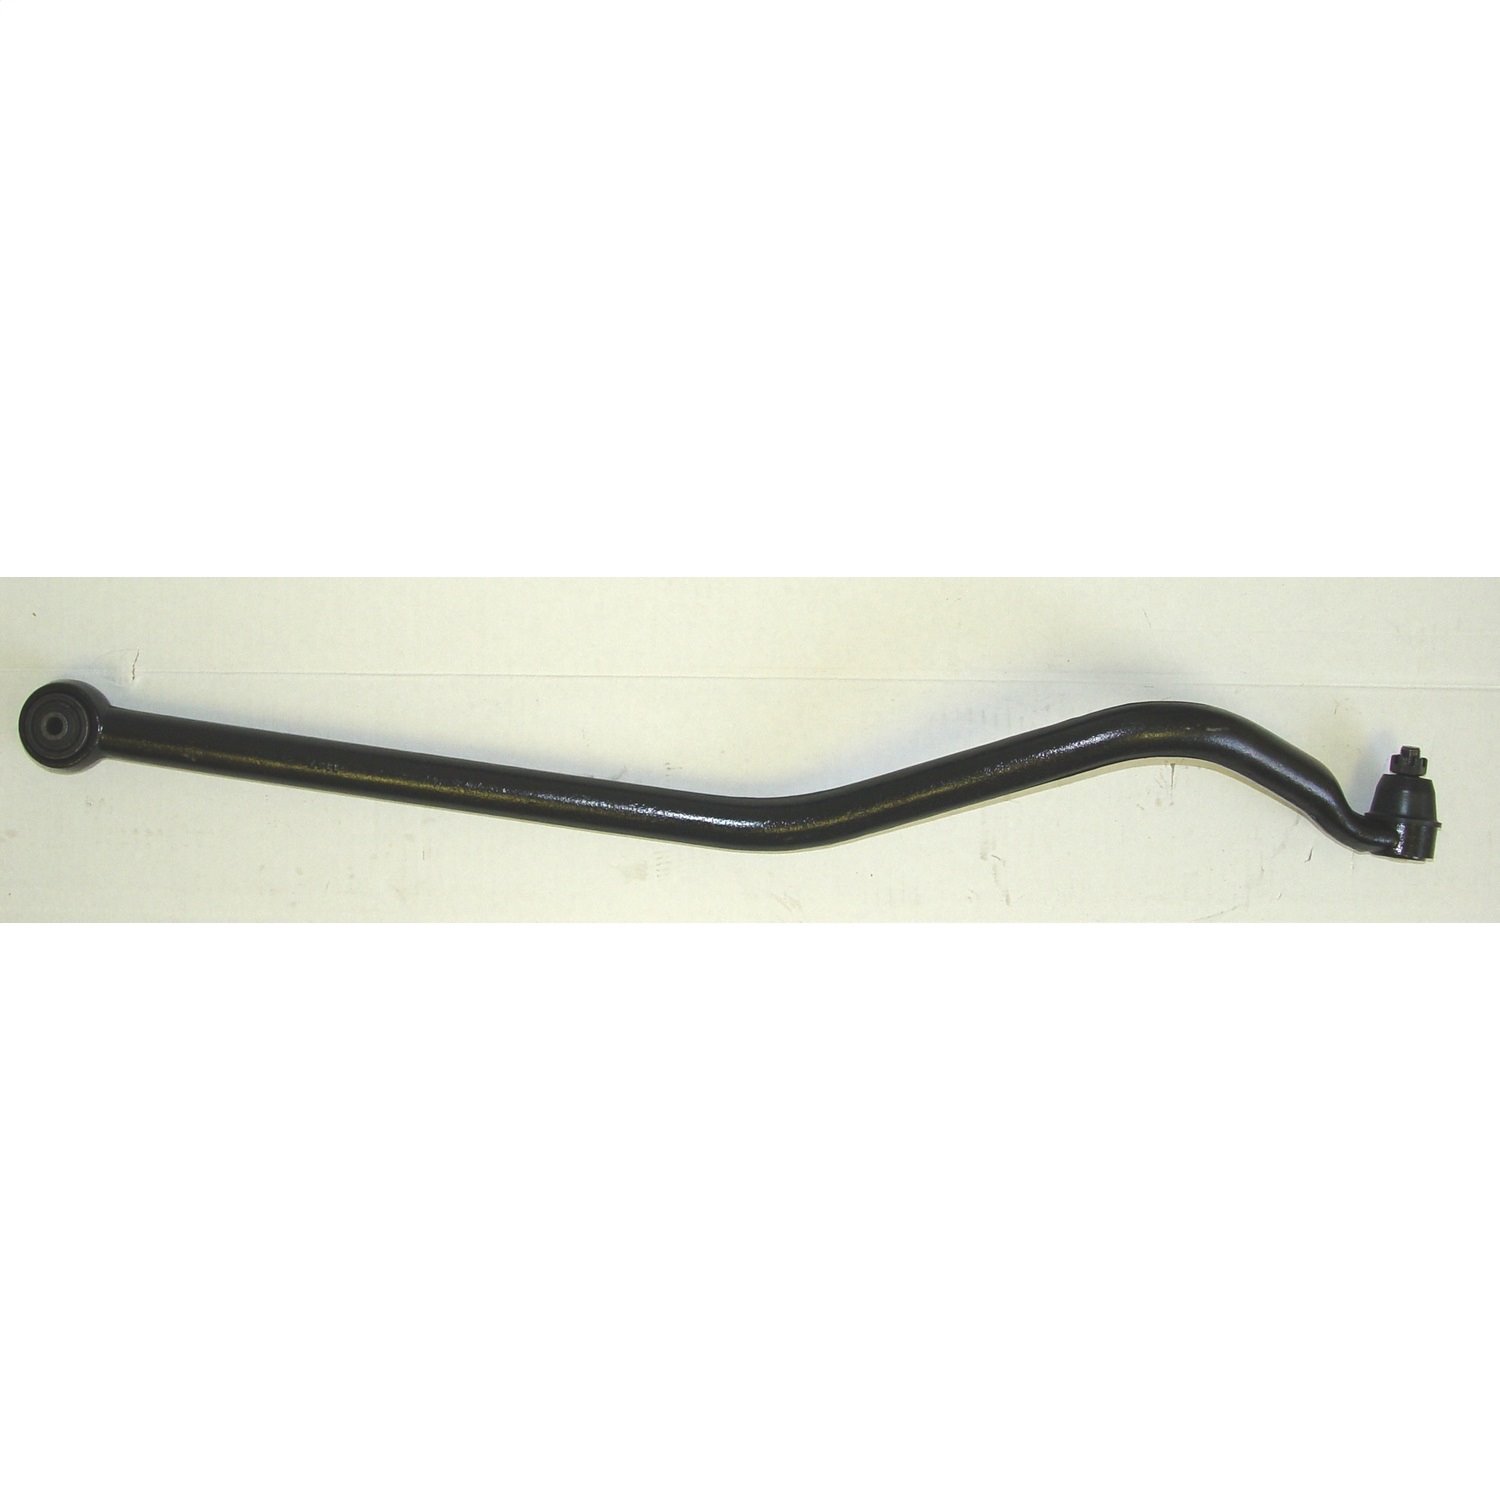 Stock replacement front trackbar from Omix-ADA, Fits 91-01 Jeep Cherokees 93-98 Grand Cherokees and 97-06 Wranglers.